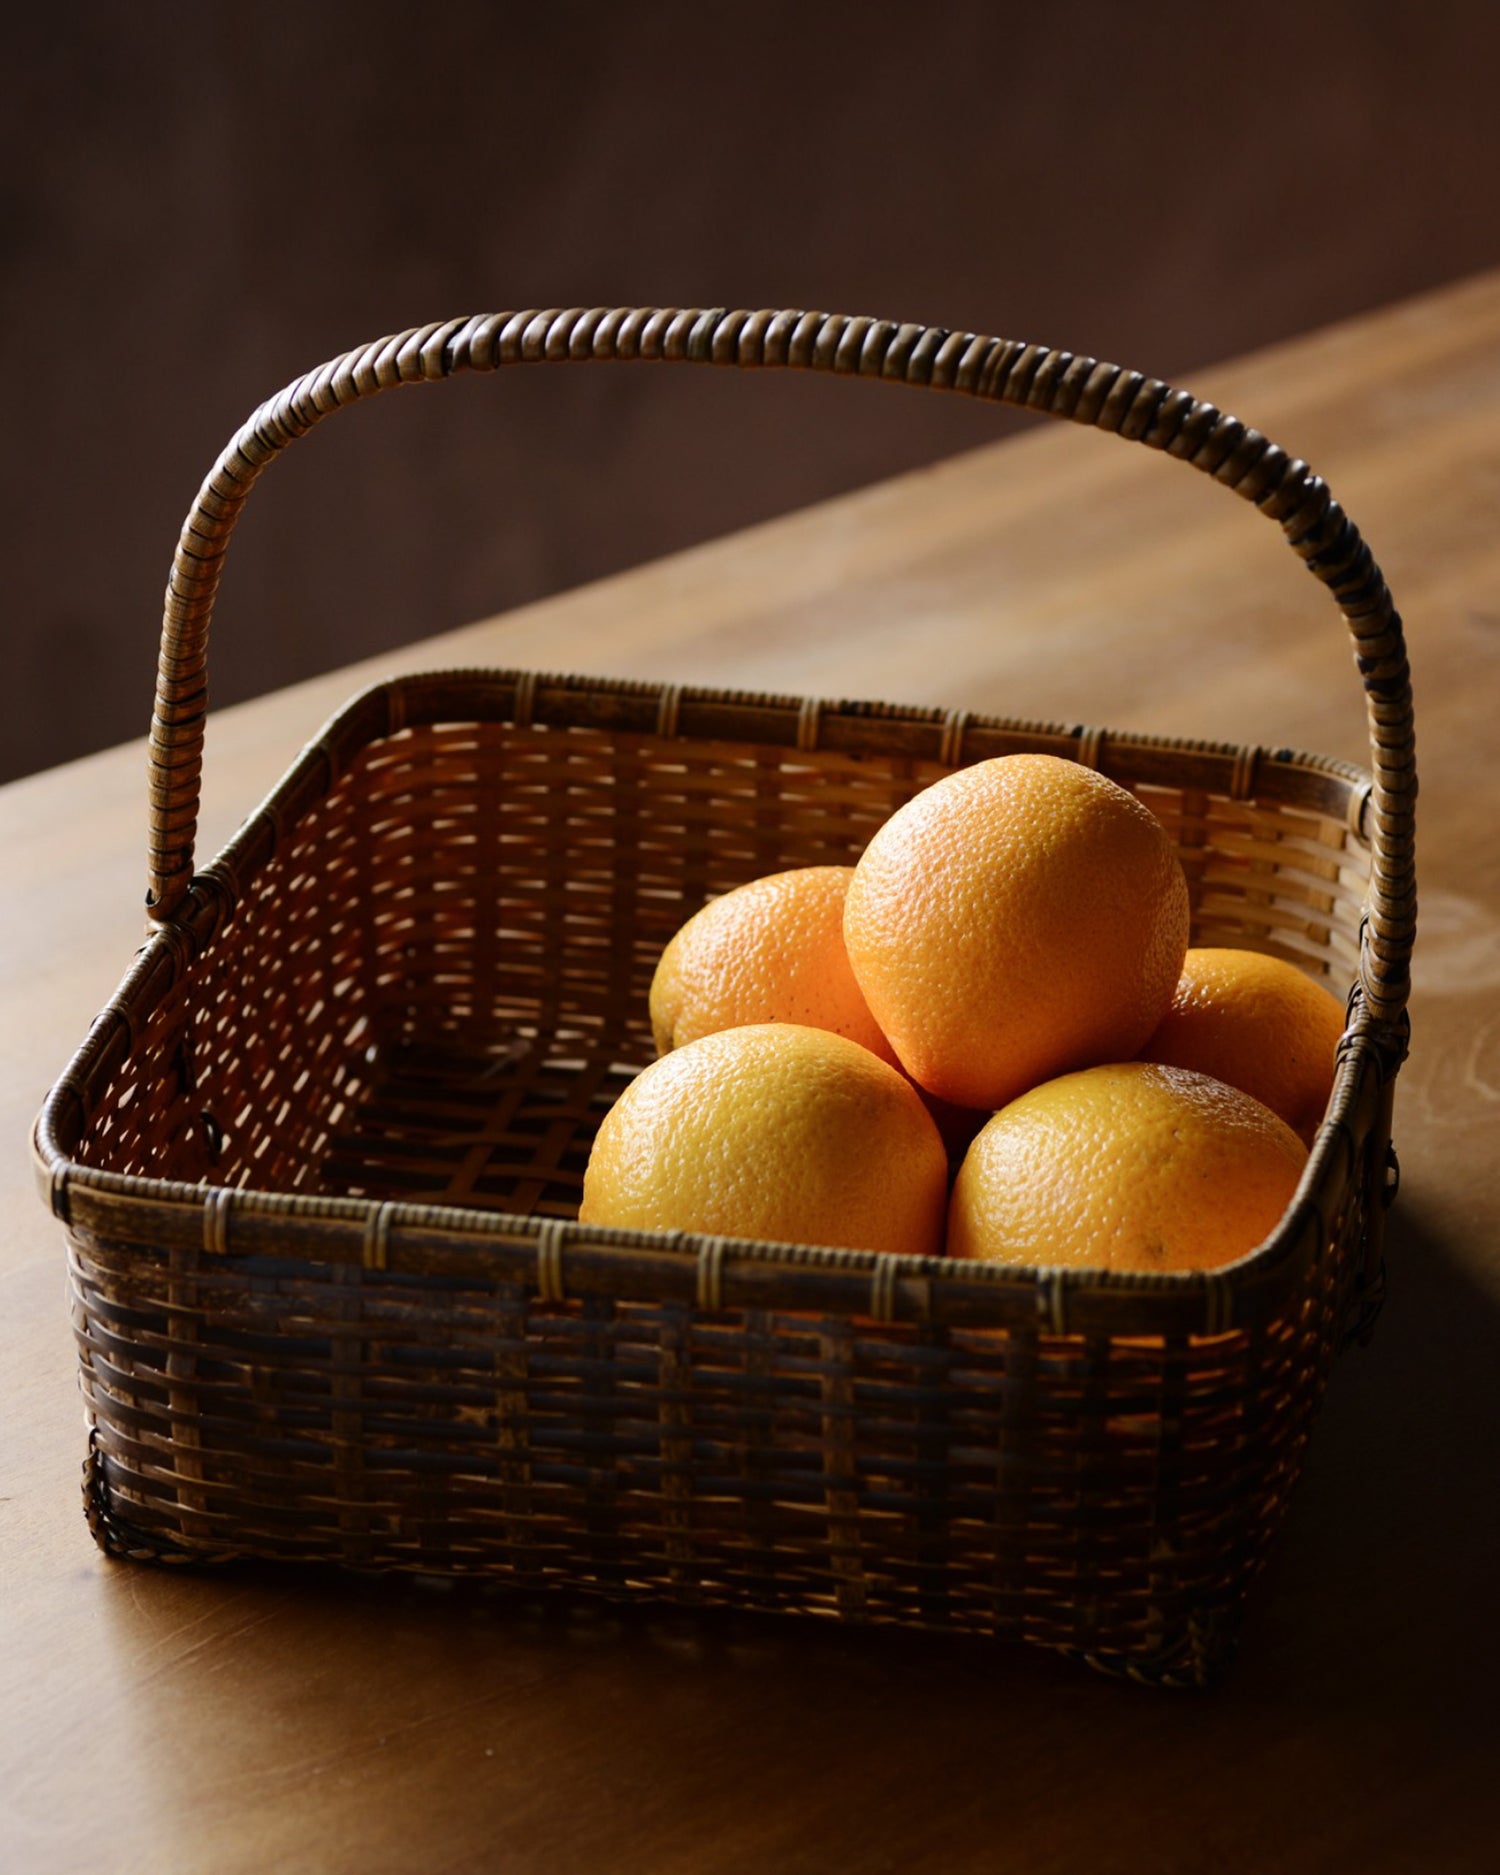 In situation image of square toradake bread basket with oranges on a wood surface.